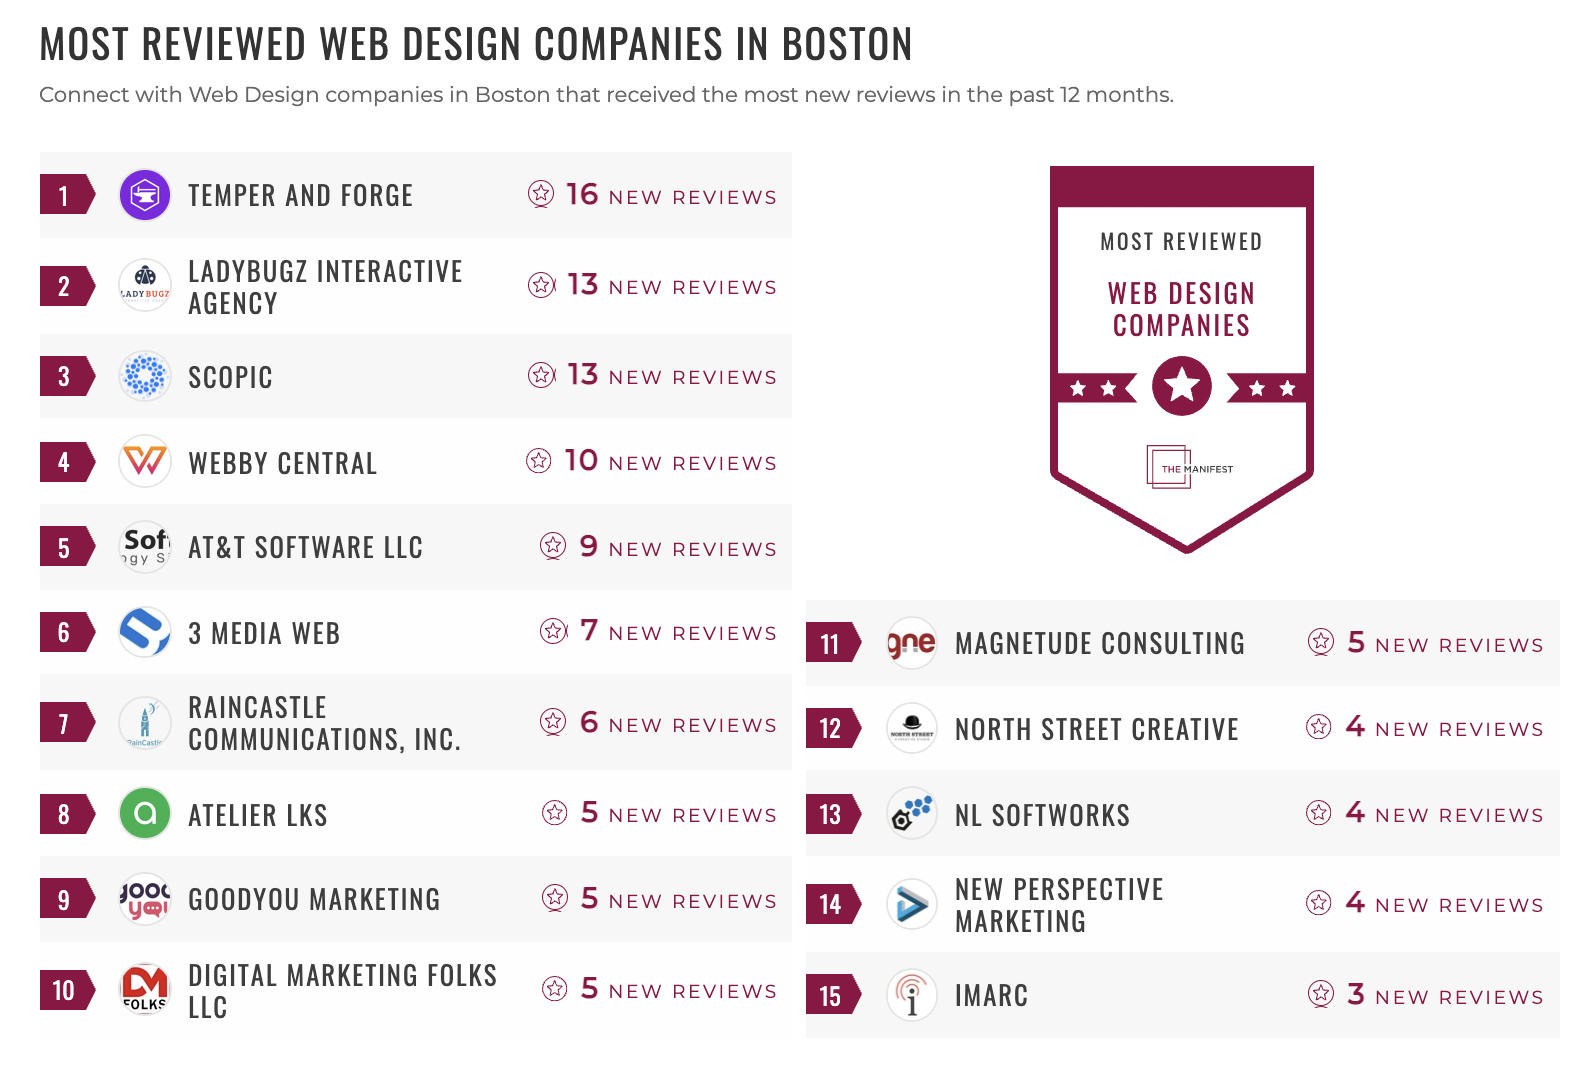 Most Reviewed Web Design Companies in Boston